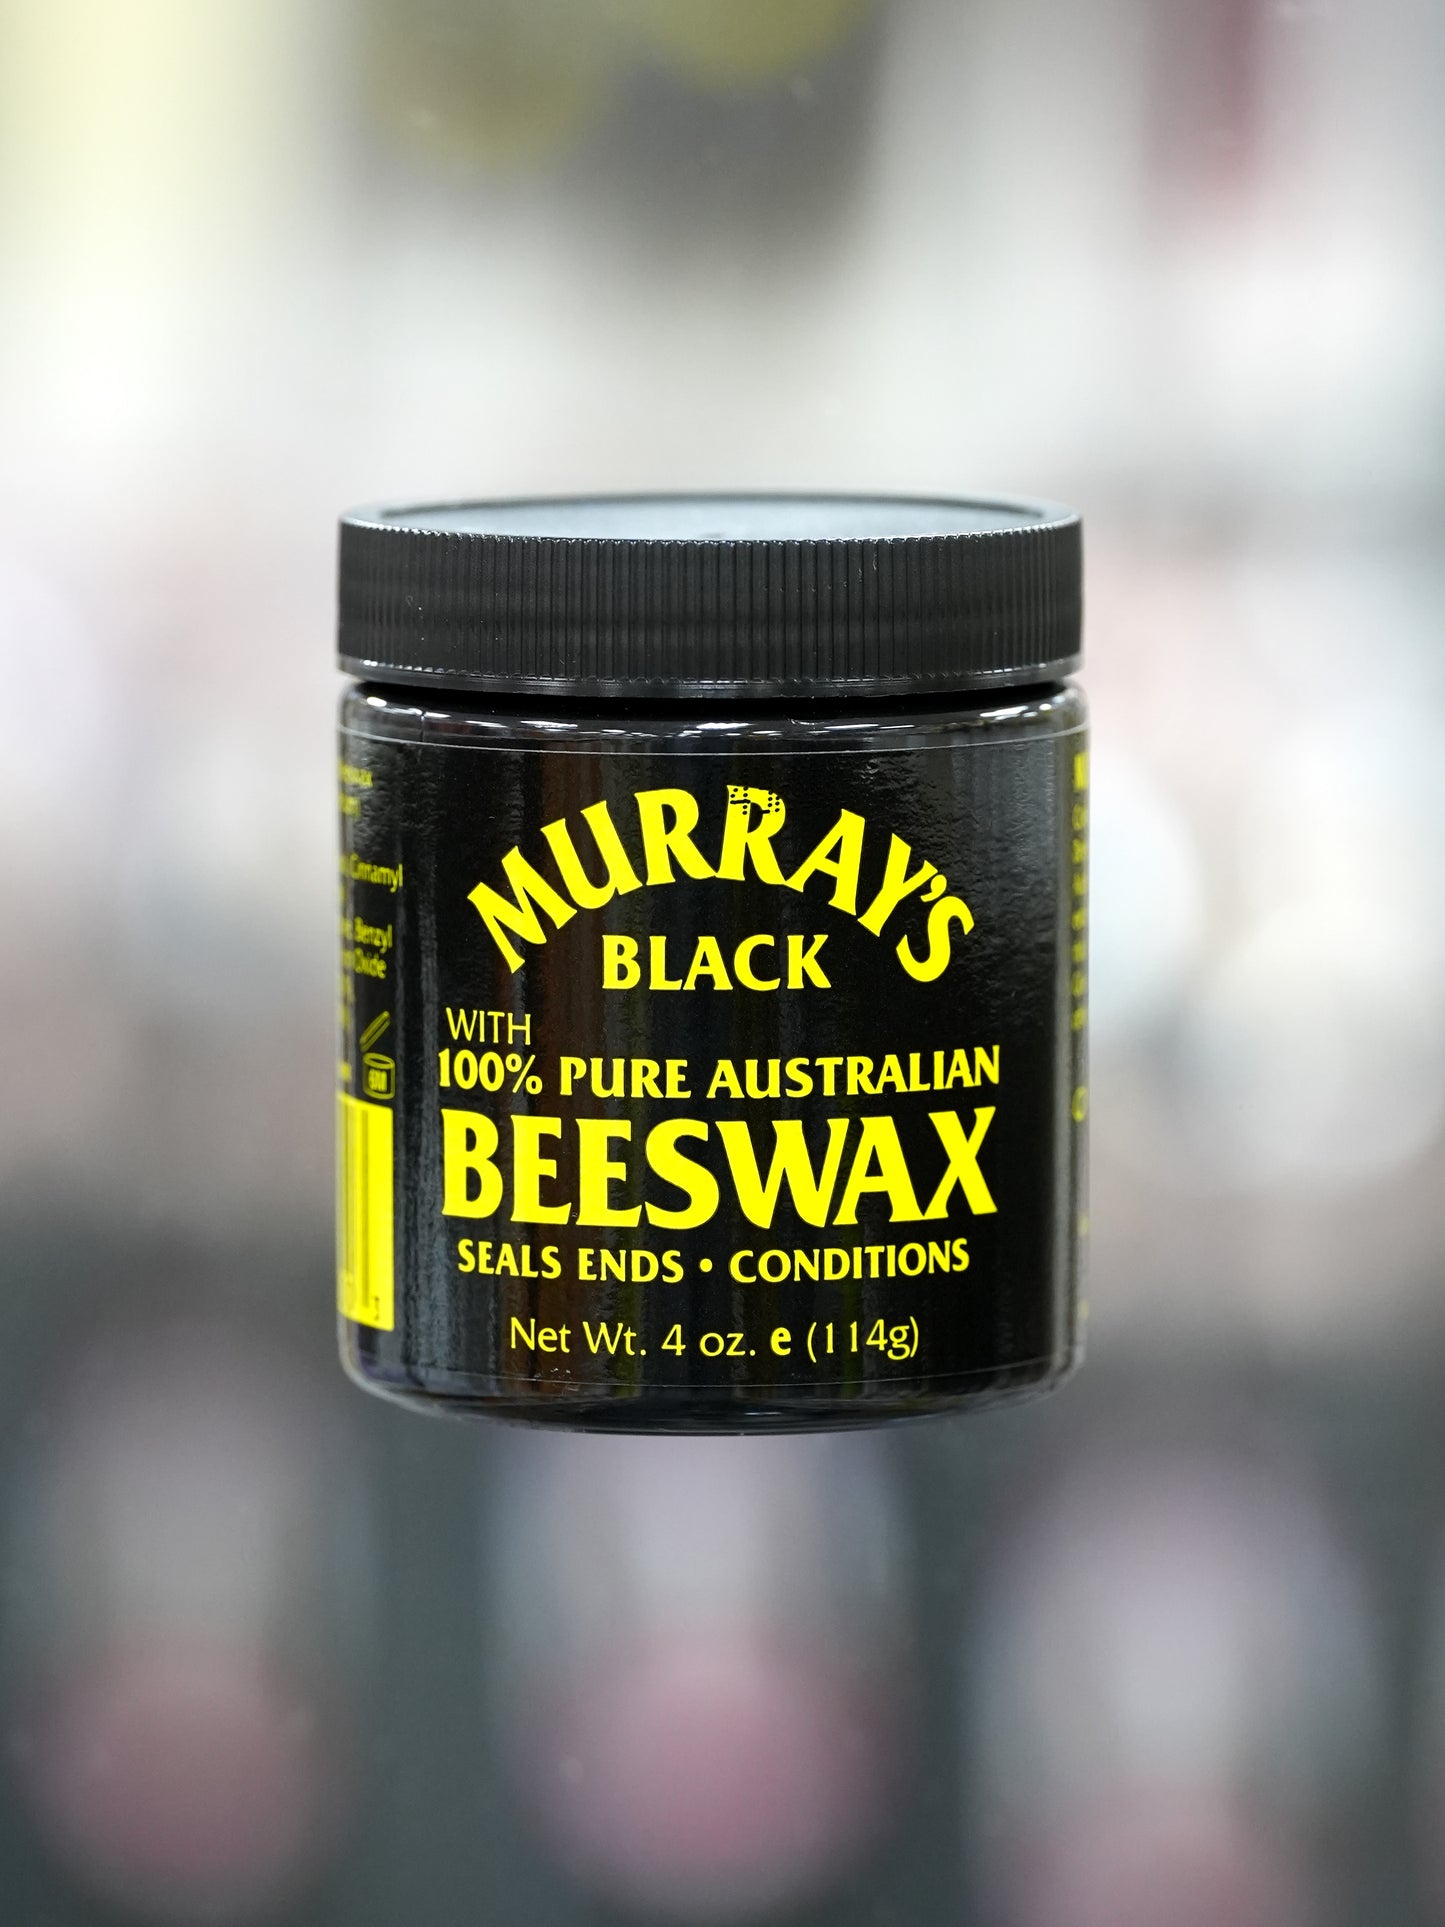 Murray's Black 100% Pure Australian Beeswax Seals Ends & Conditions 4oz